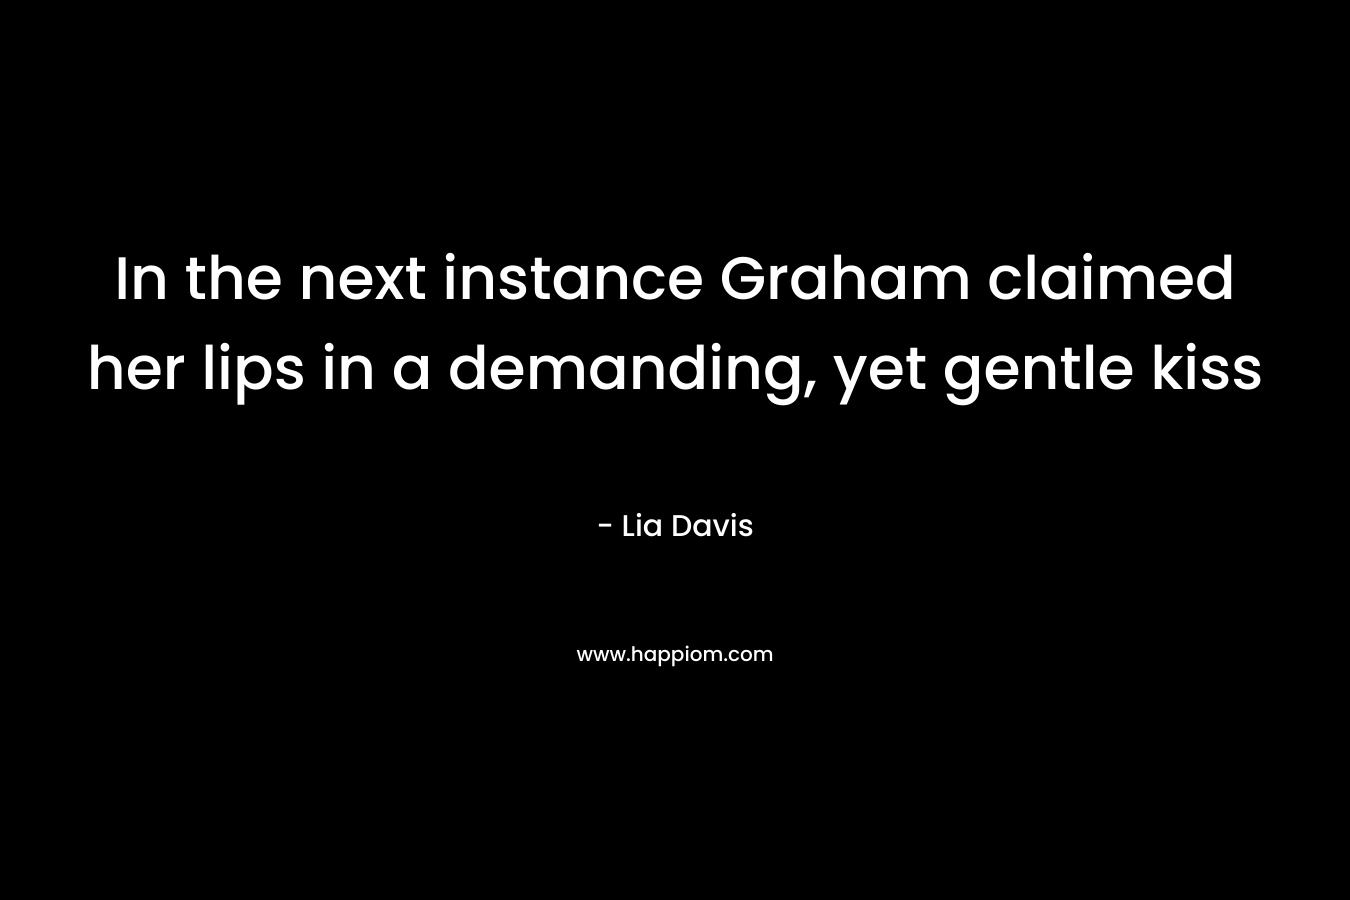 In the next instance Graham claimed her lips in a demanding, yet gentle kiss – Lia Davis